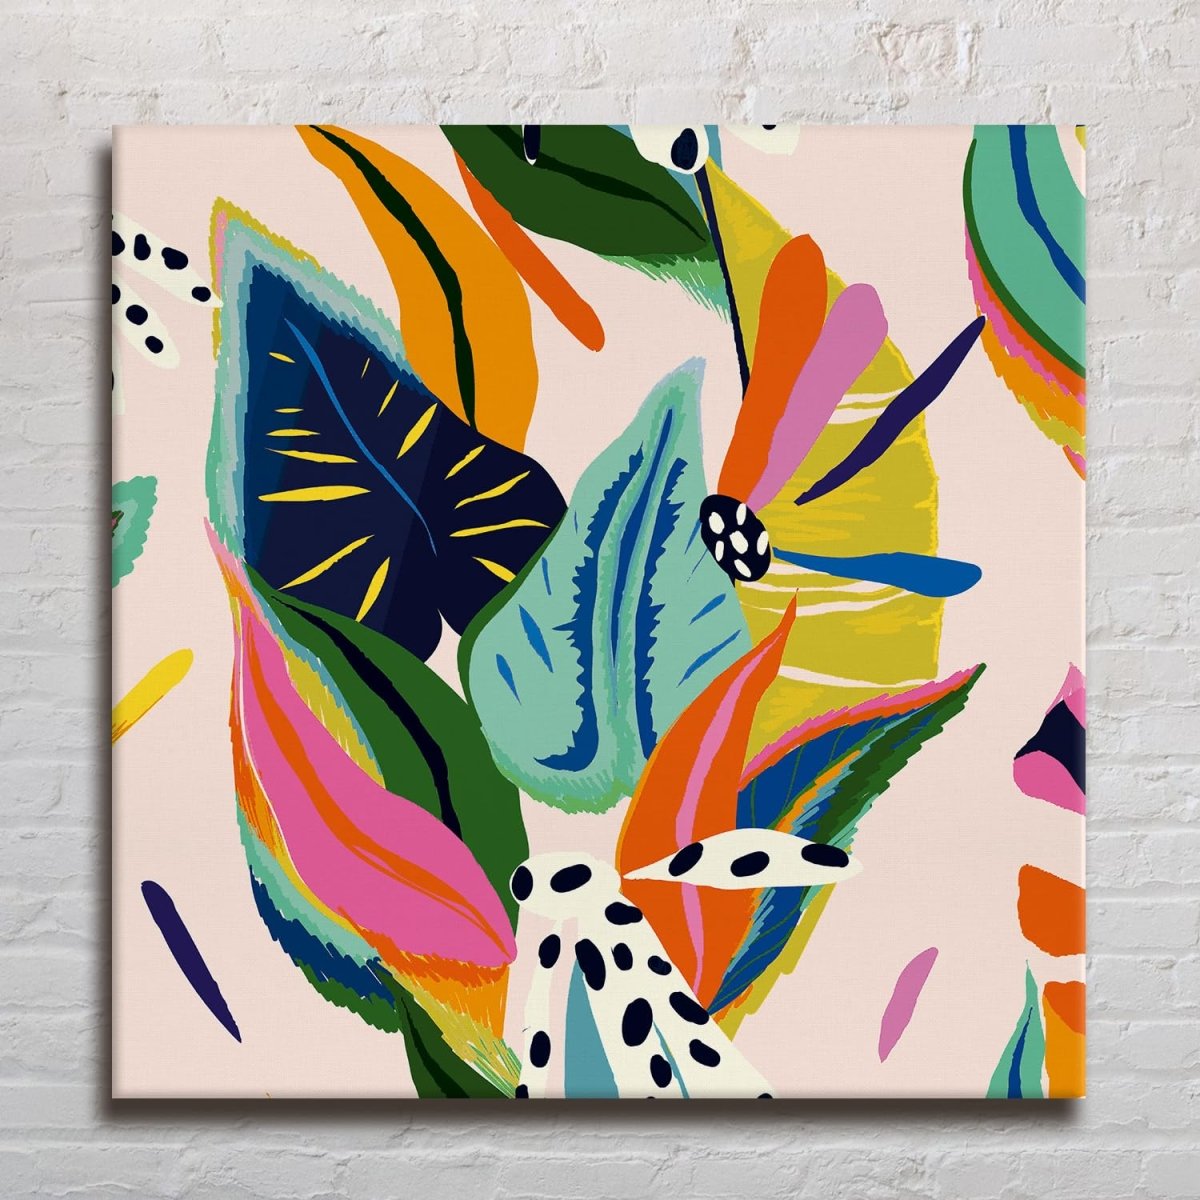 A Glimpse of the Sublime Boho Canvas Wall Art (36 x 36 Inches)